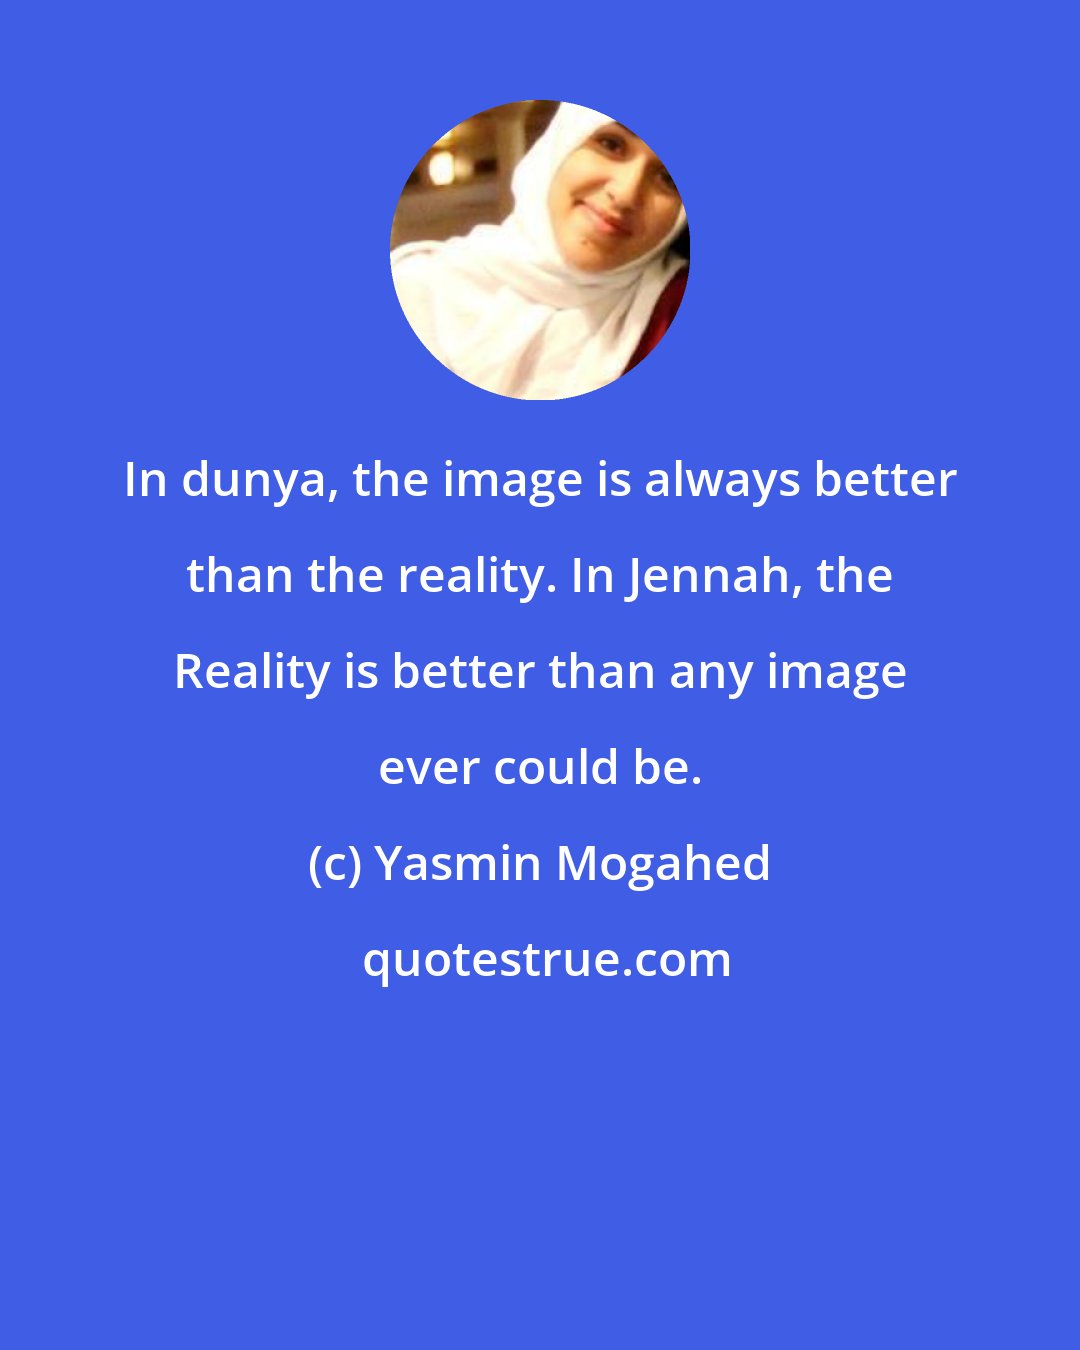 Yasmin Mogahed: In dunya, the image is always better than the reality. In Jennah, the Reality is better than any image ever could be.